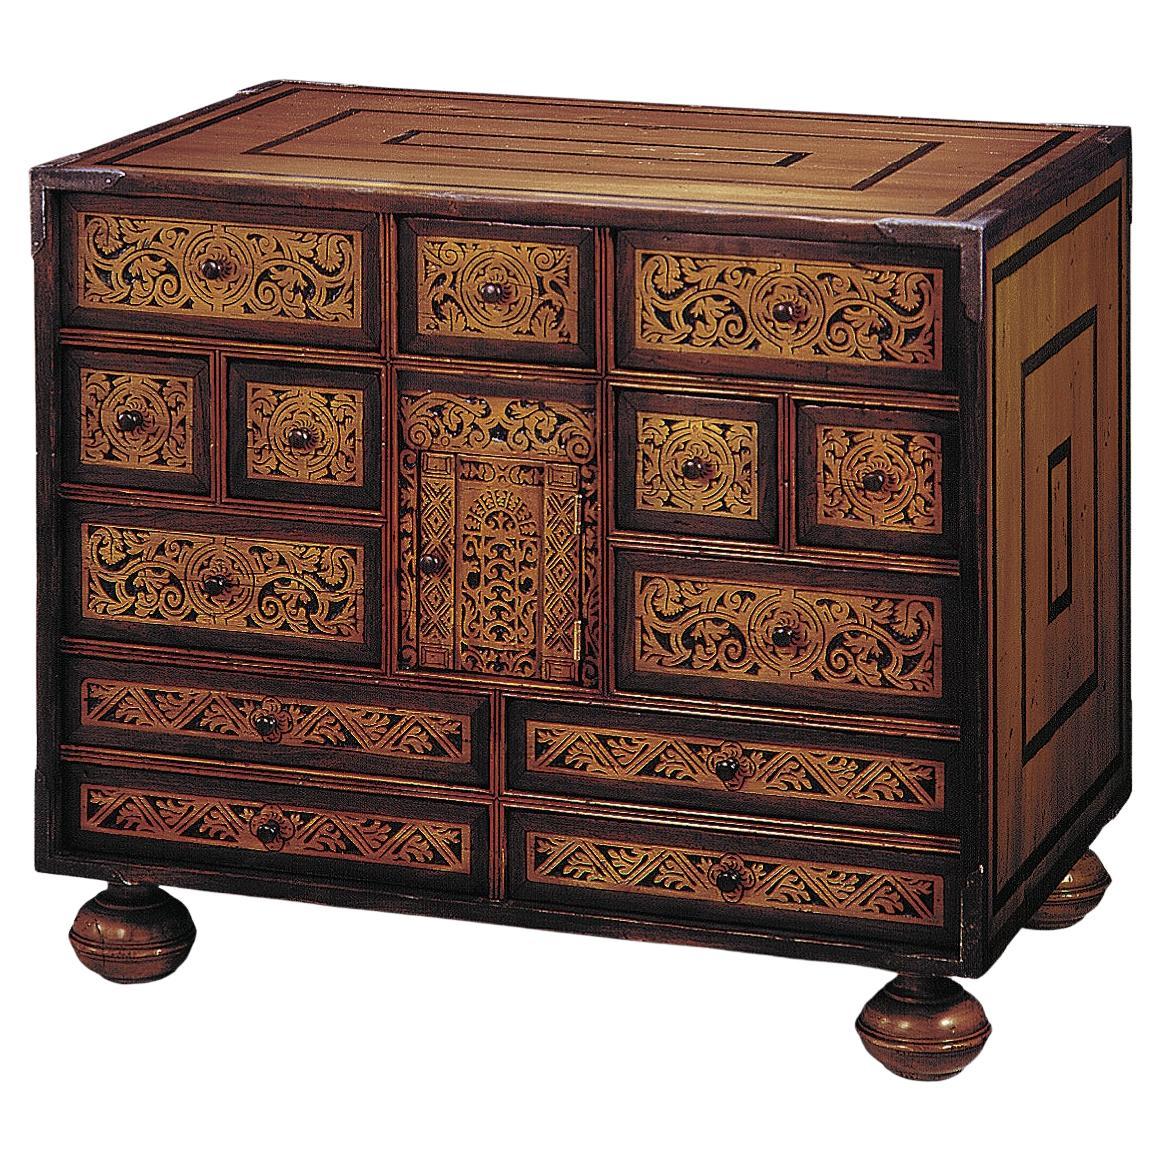 Oaxaqueño Bargueño inspired by 16th C Spanish-style furniture w/ drawers & doors